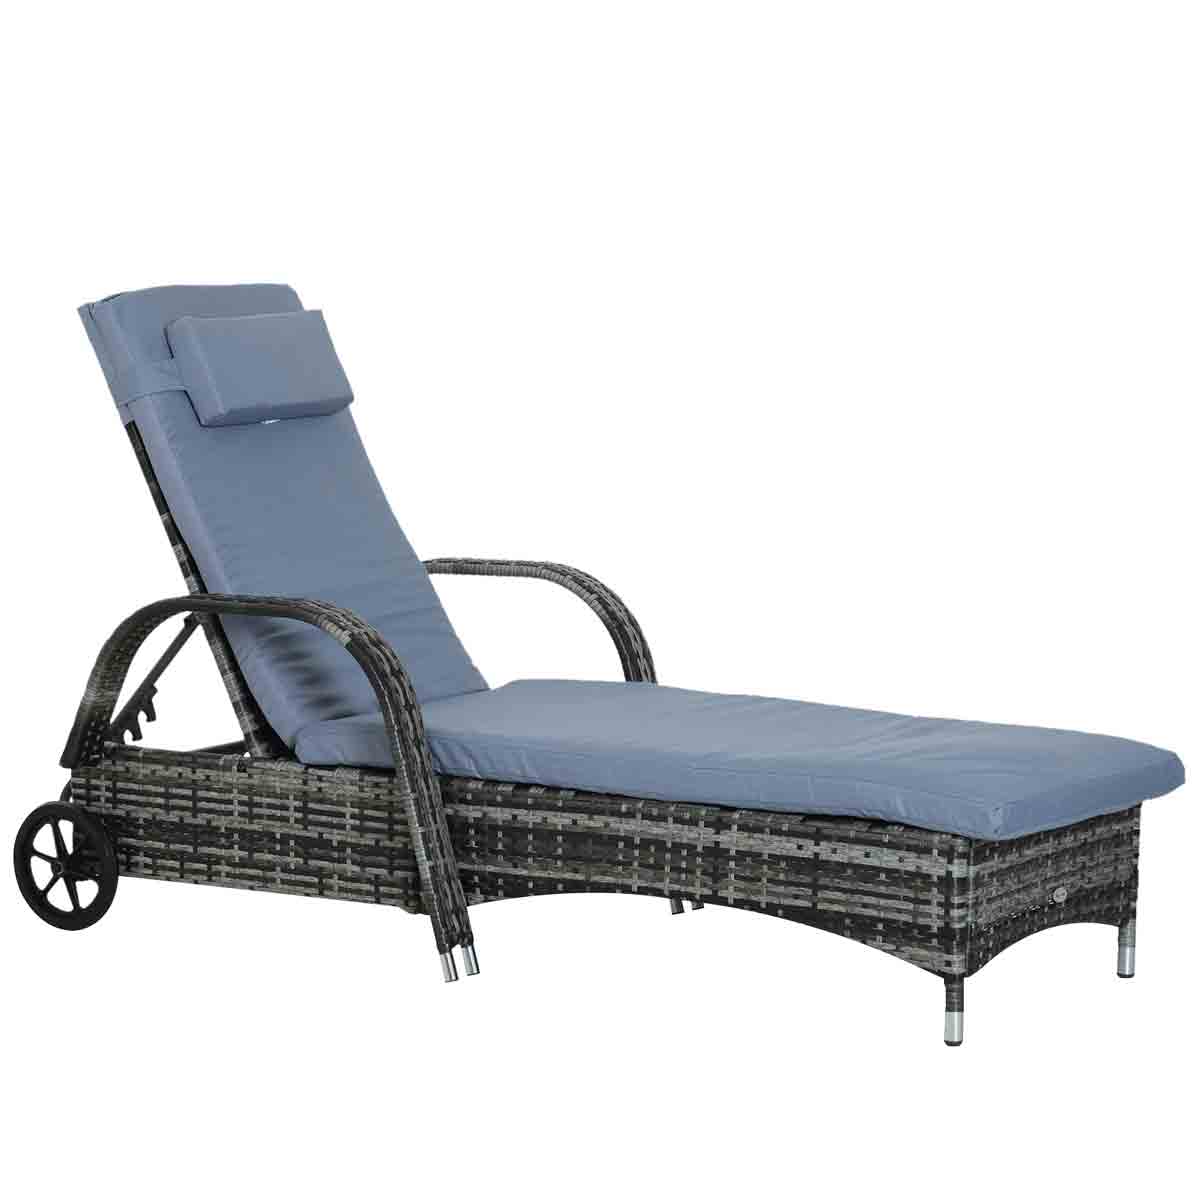 Outsunny Adjustable Wicker Rattan Sun Lounger Recliner Chair W/ Cushion Grey